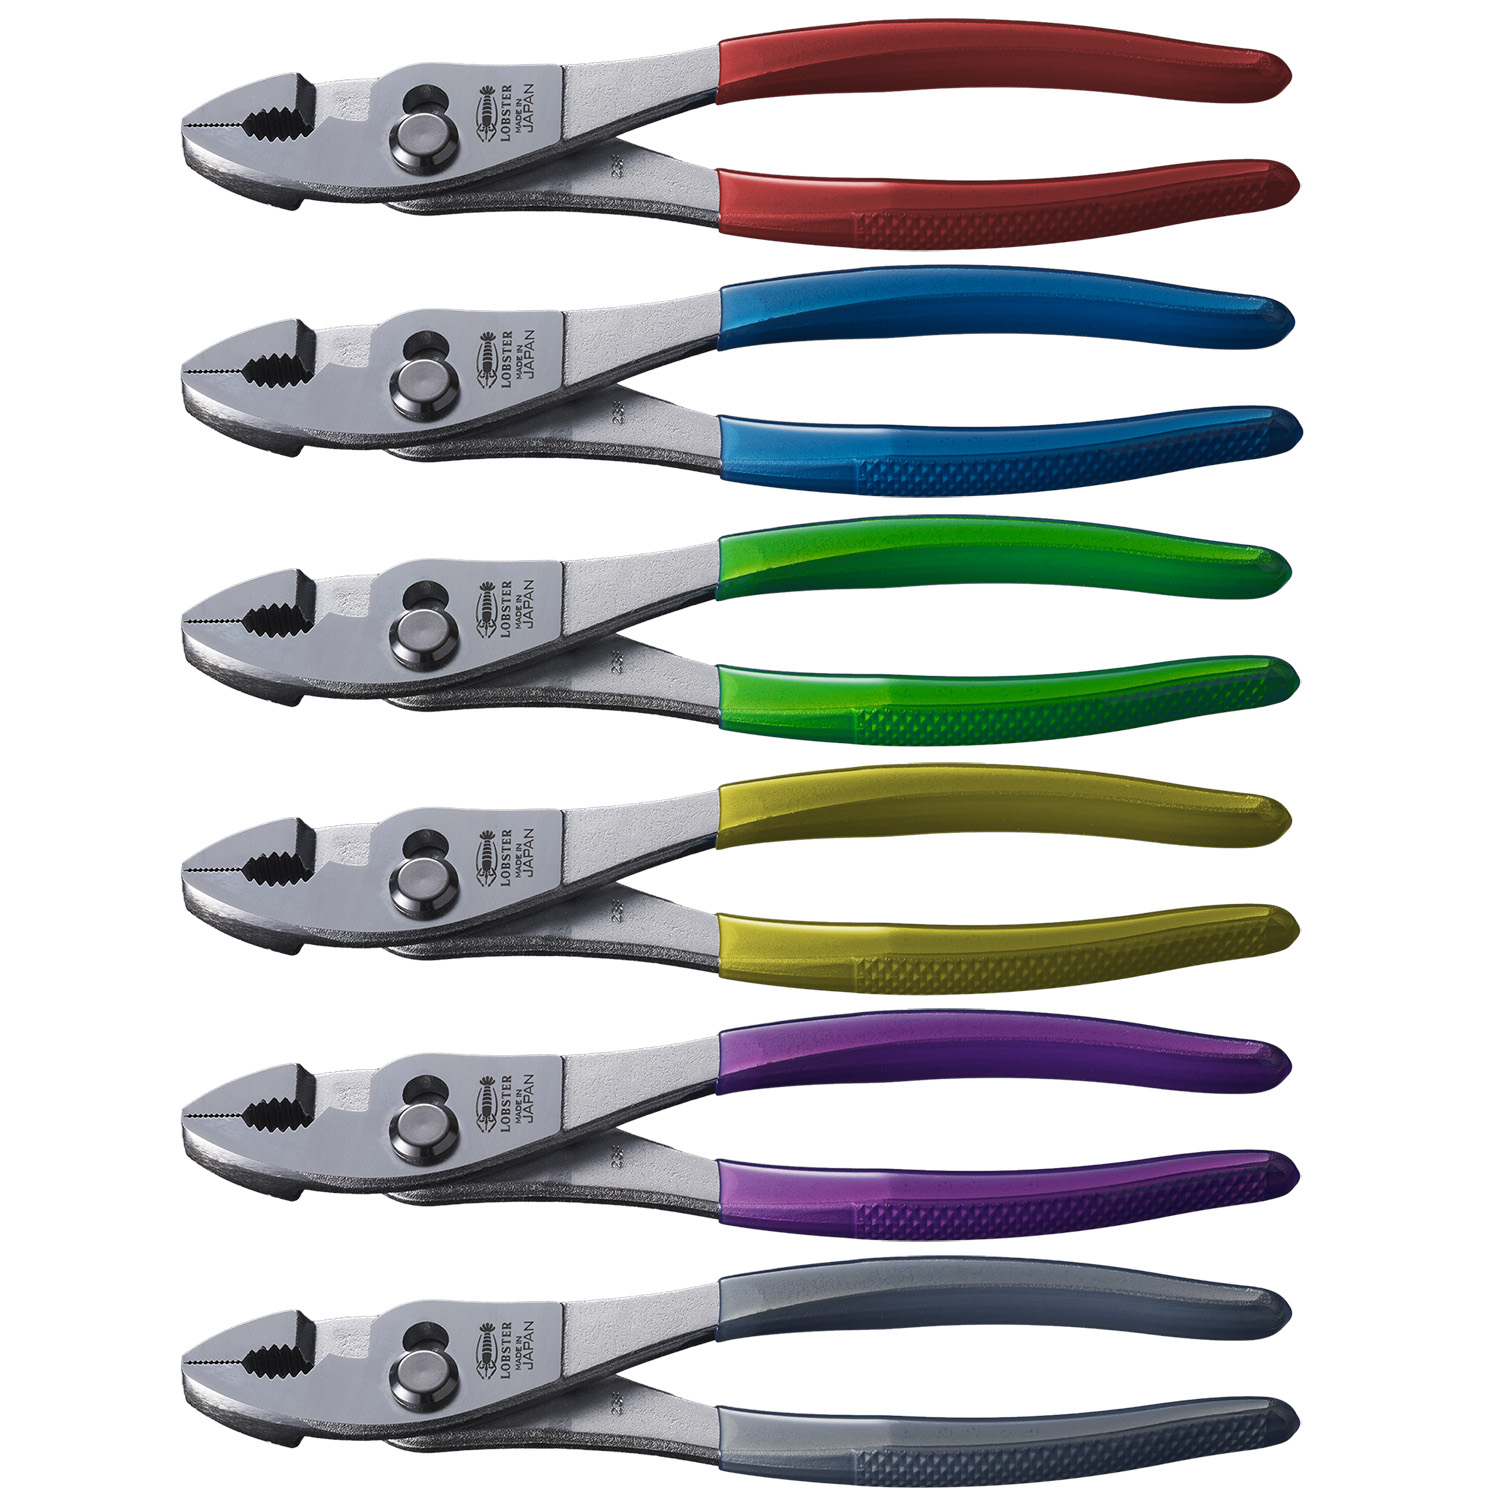 Colored grip: 6 colors in total